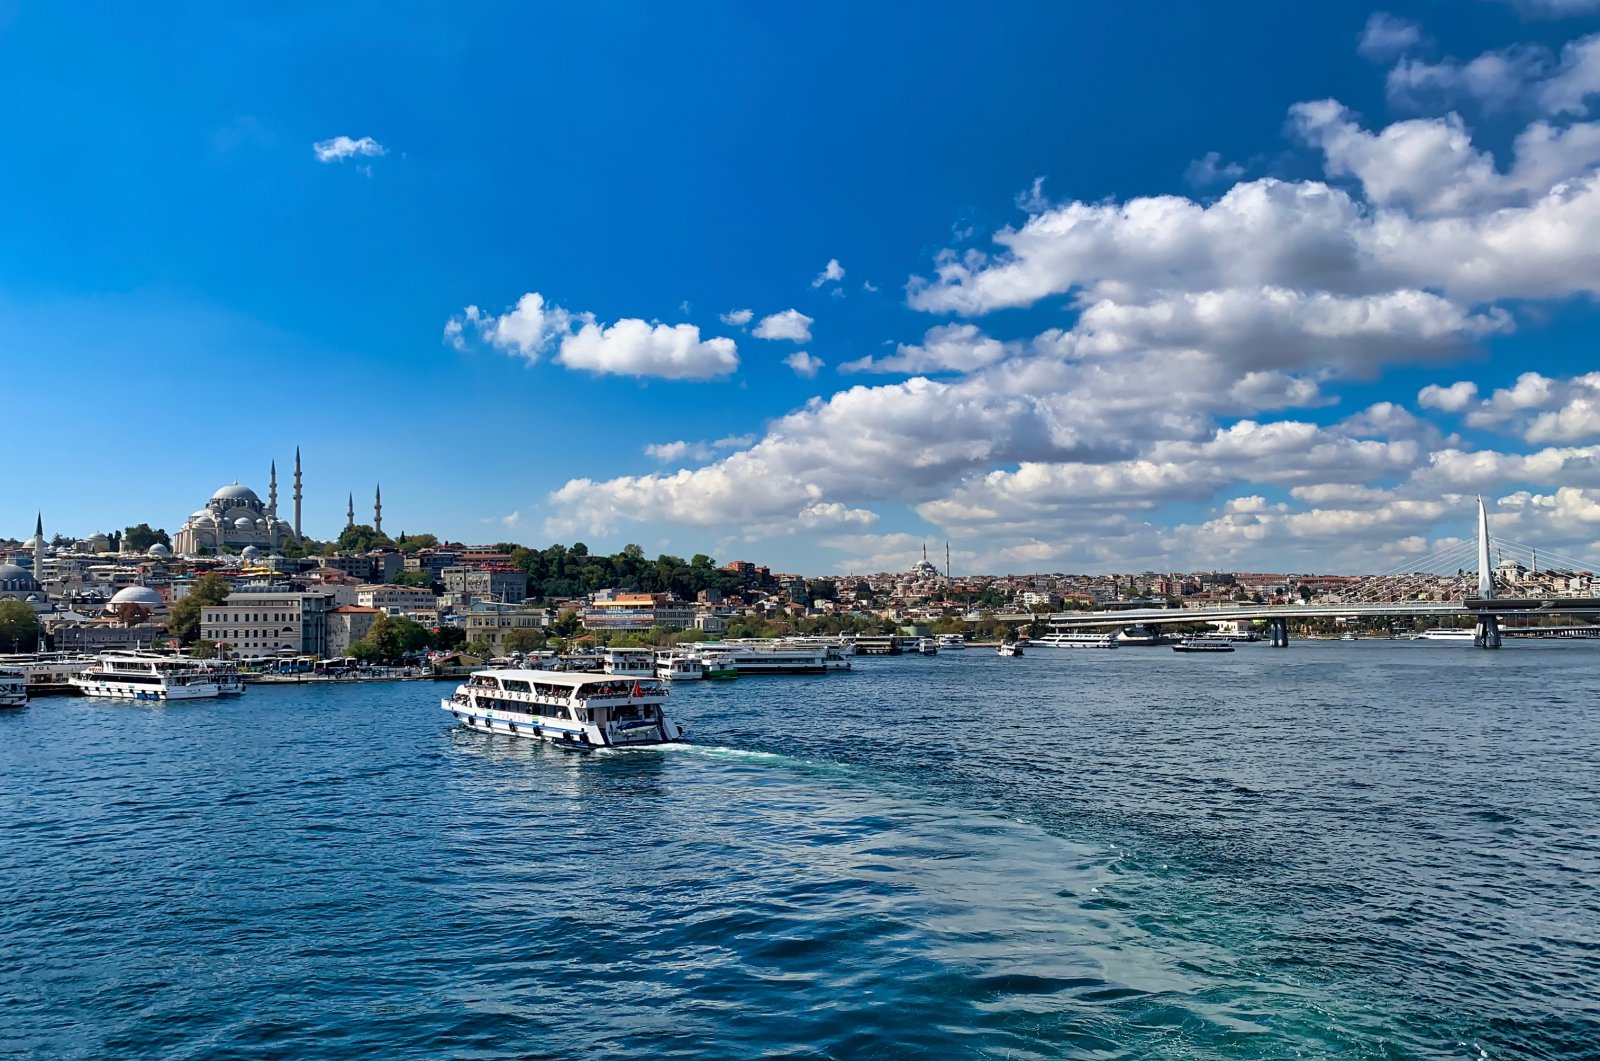 A view of the Marmara coast of Istanbul, Turkey, Sept. 25, 2019. (Shutterstock Photo)